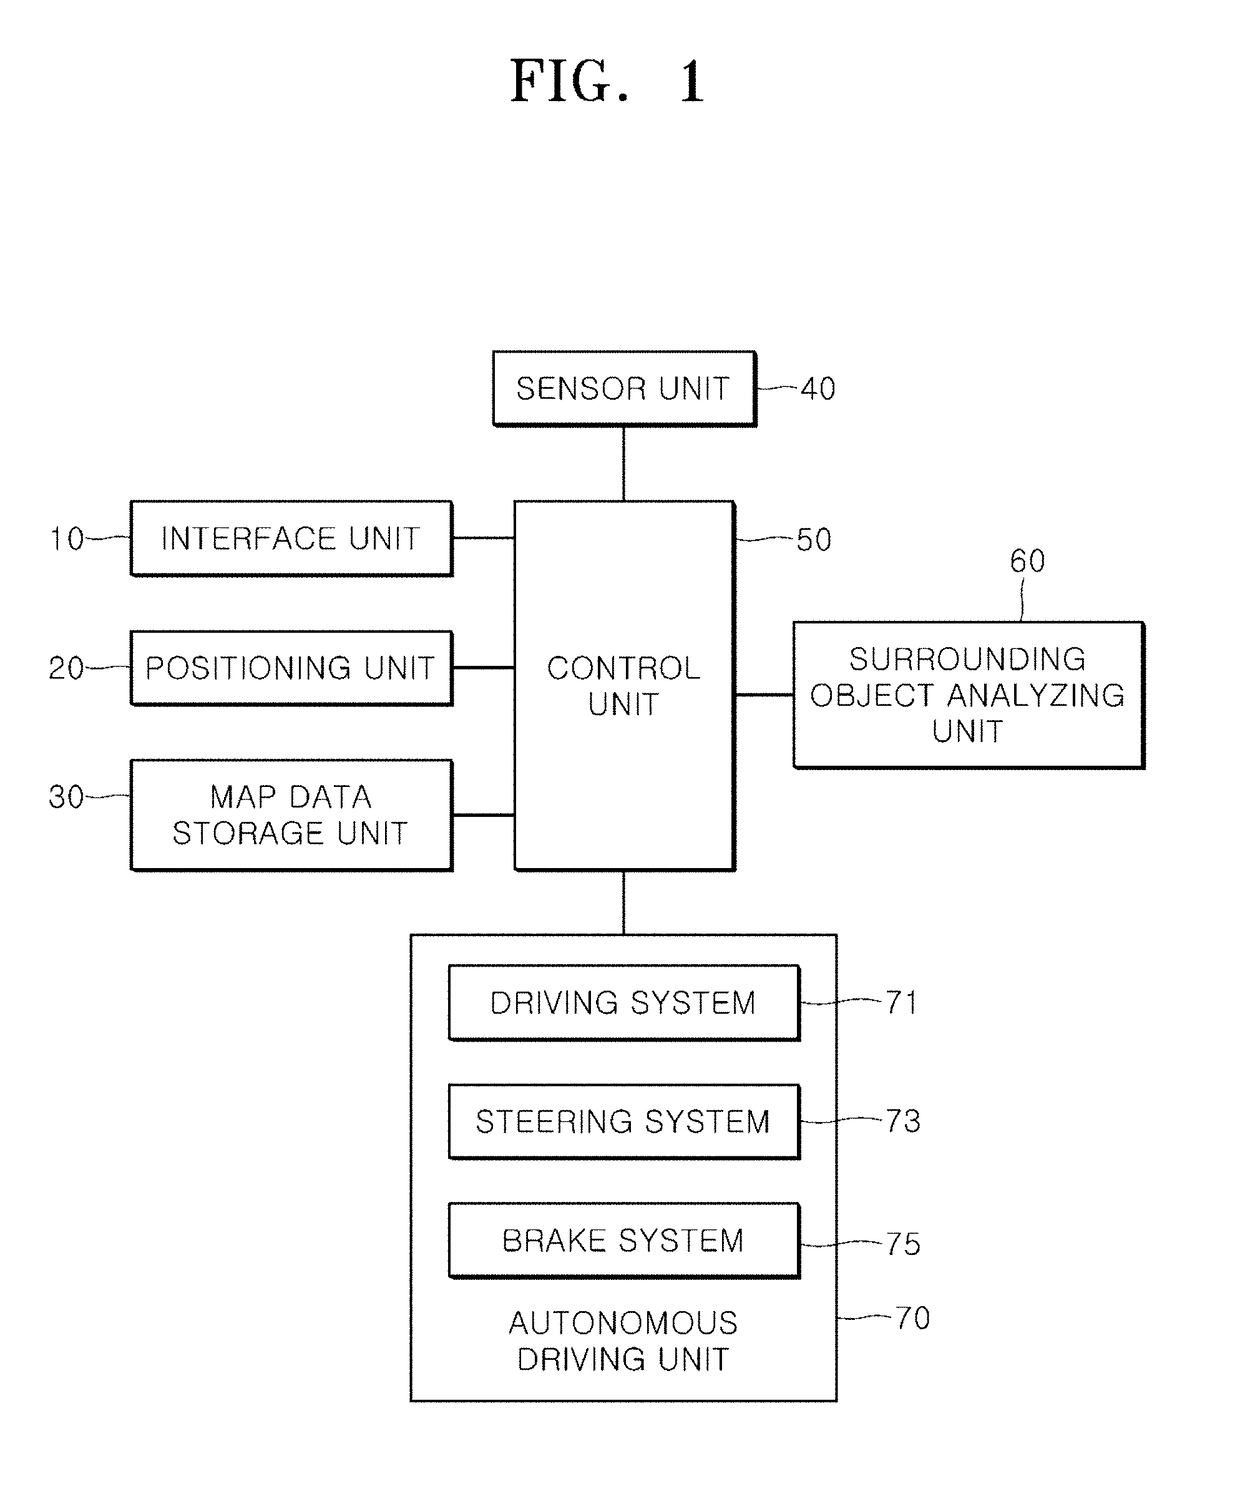 Apparatus, method and system for autonomous driving